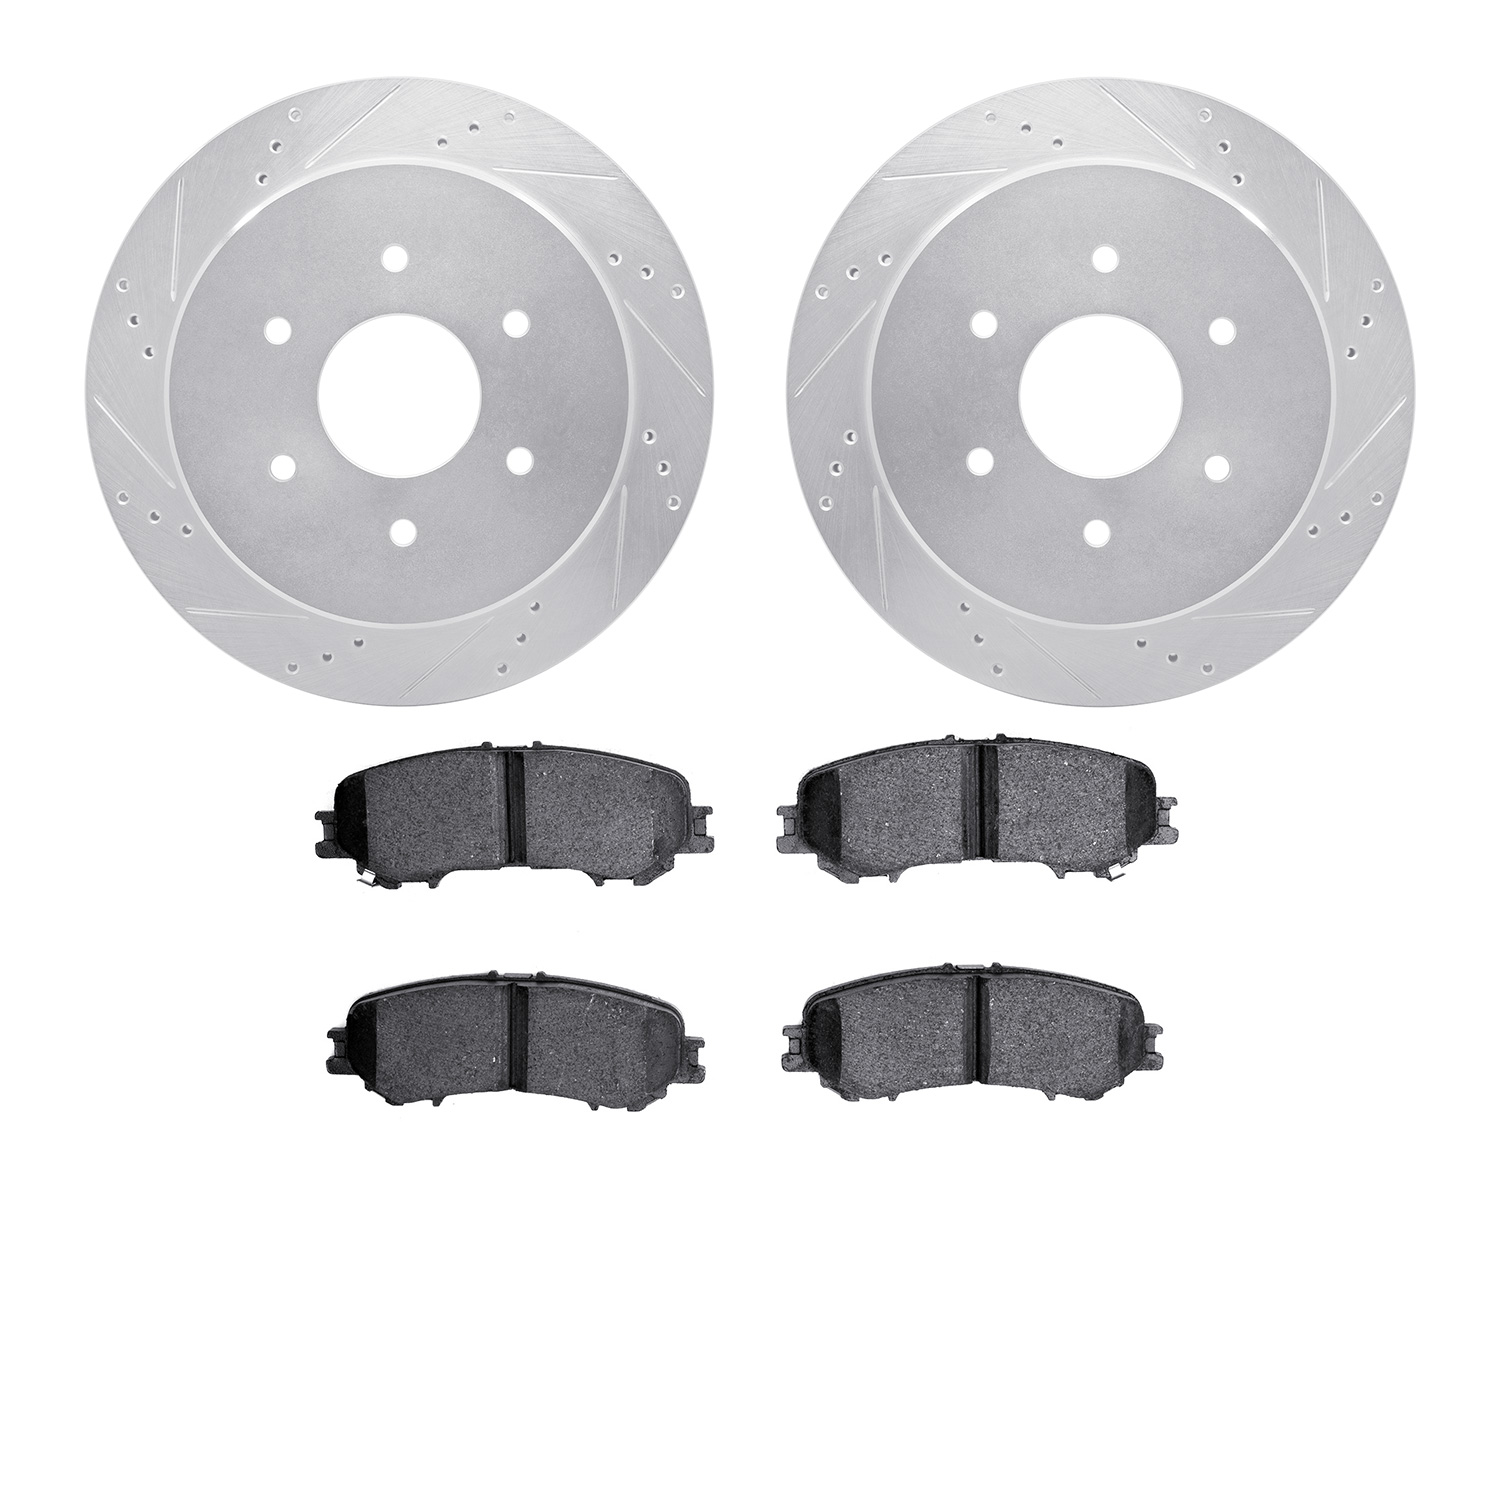 7402-67010 Drilled/Slotted Brake Rotors with Ultimate-Duty Brake Pads Kit [Silver], Fits Select Infiniti/Nissan, Position: Rear